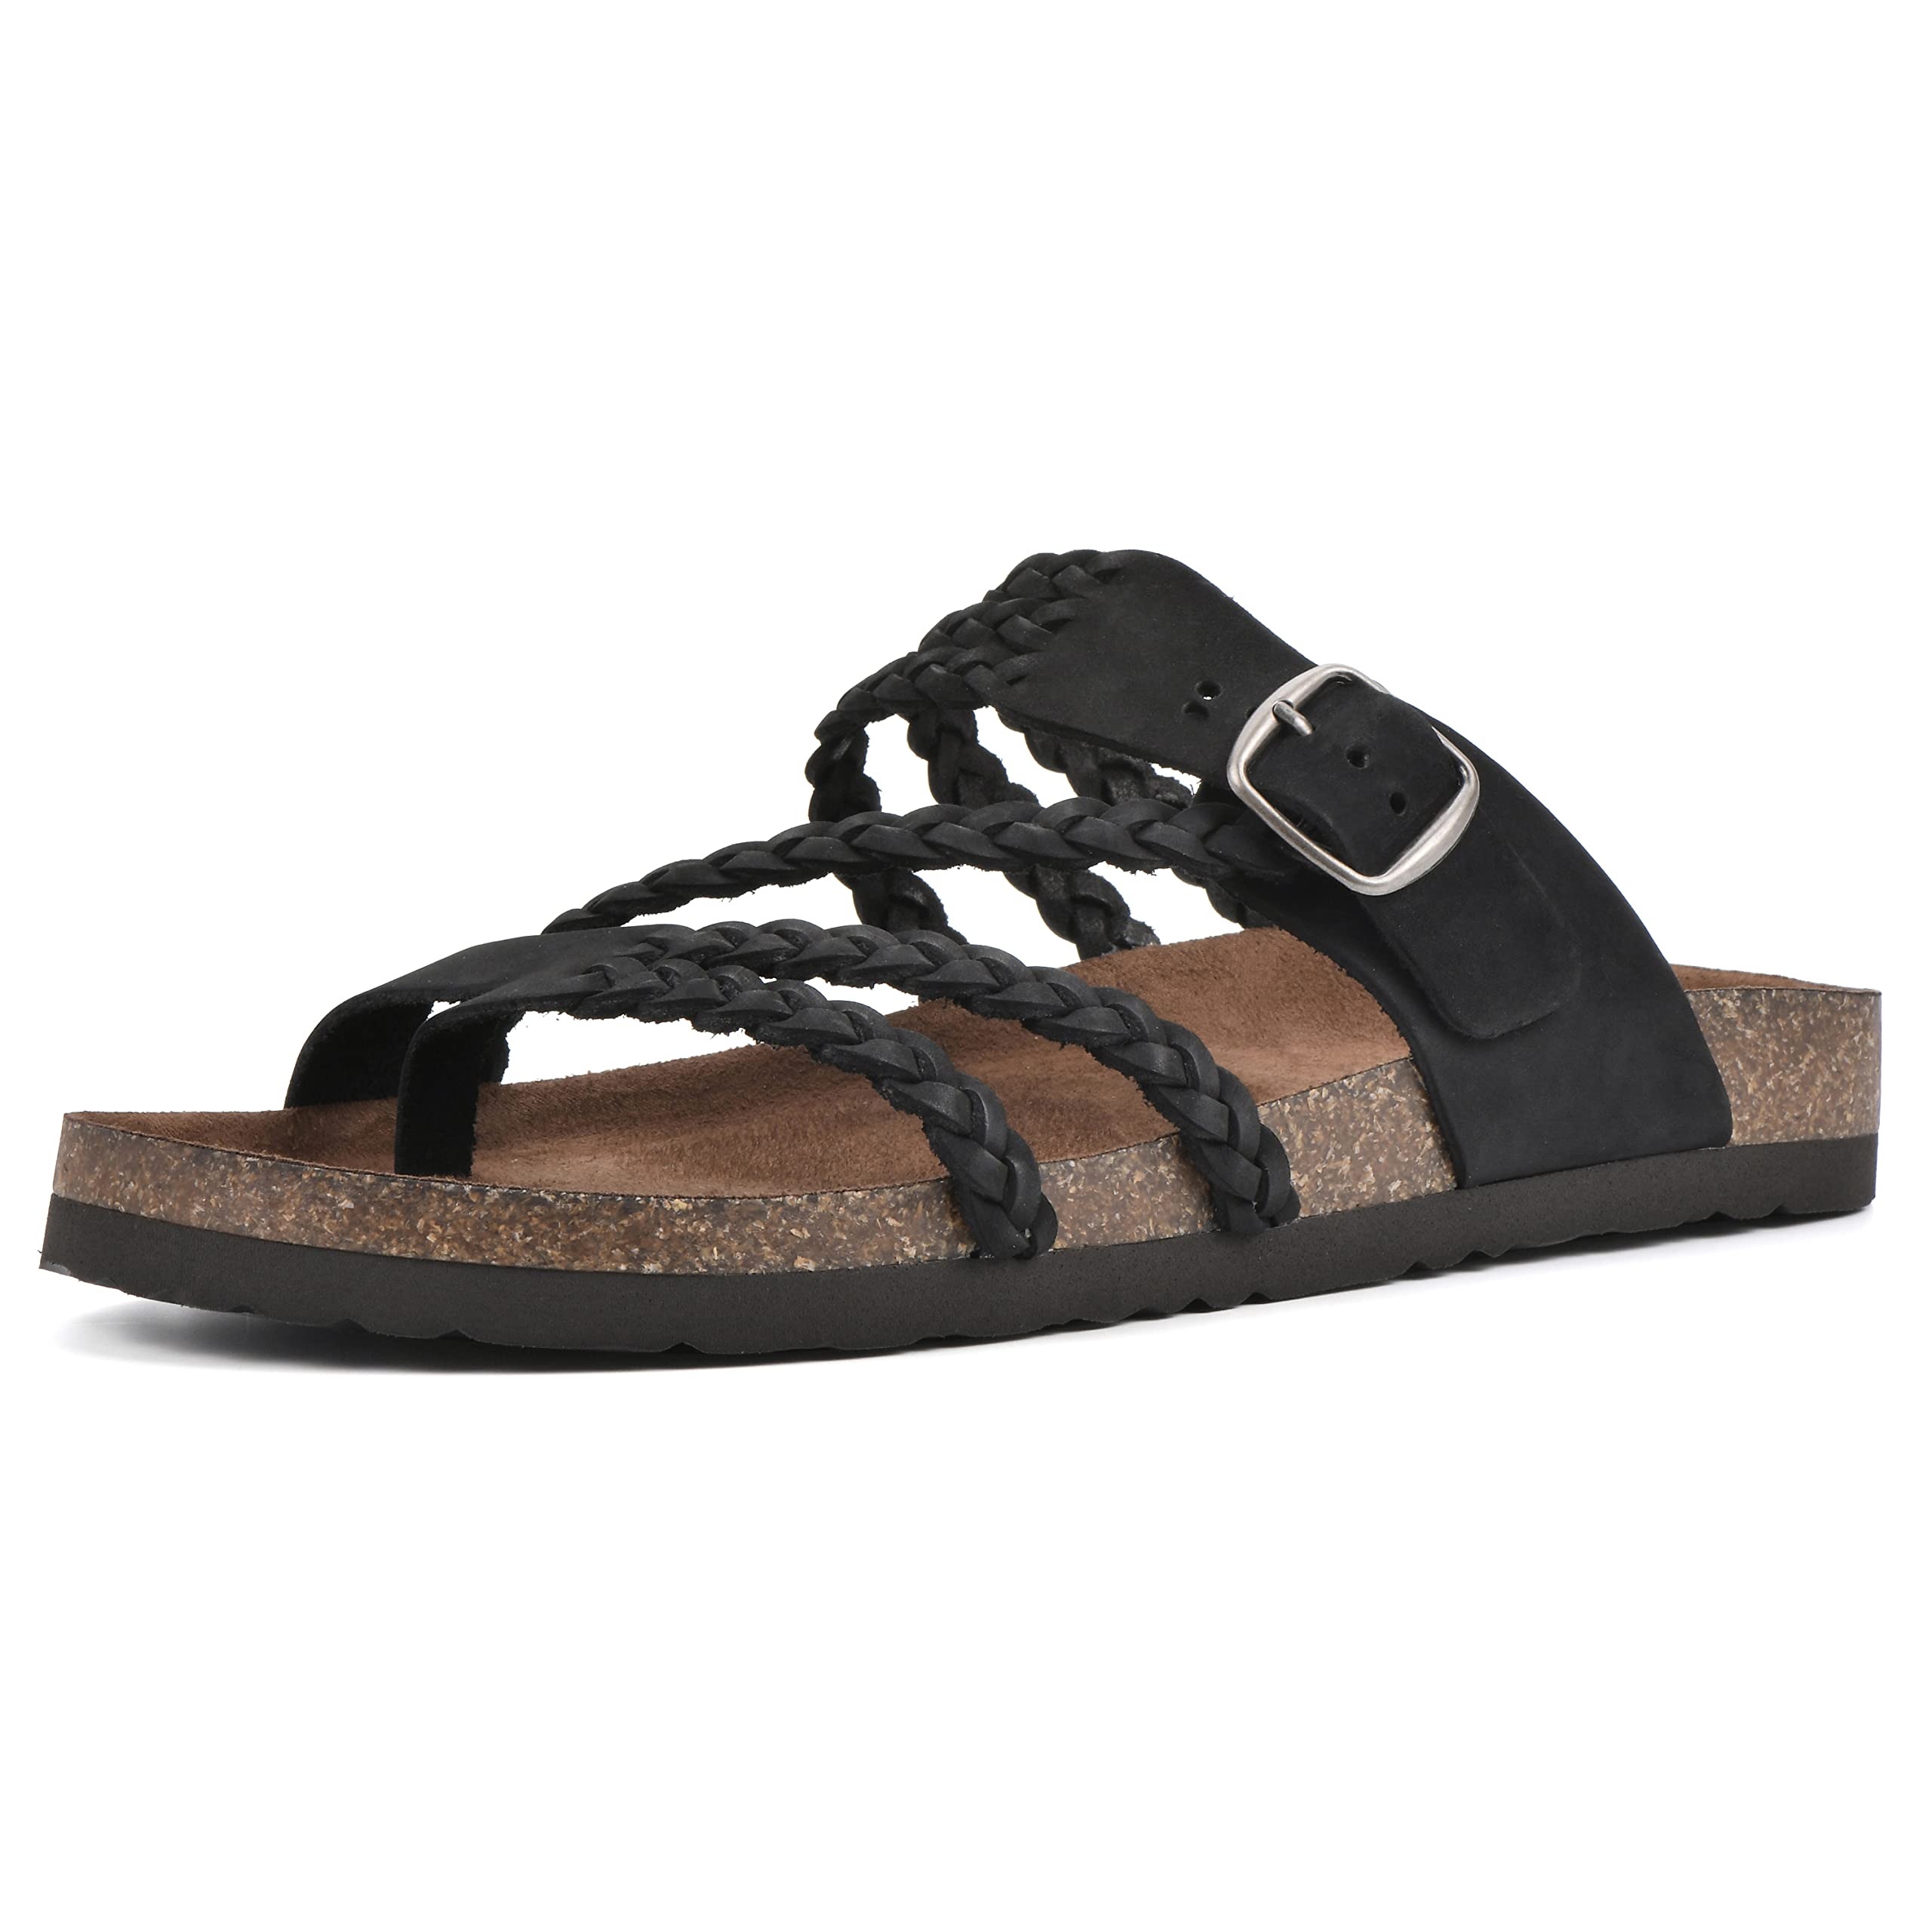 WHITE MOUNTAIN Women's Hayleigh Footbed Sandal